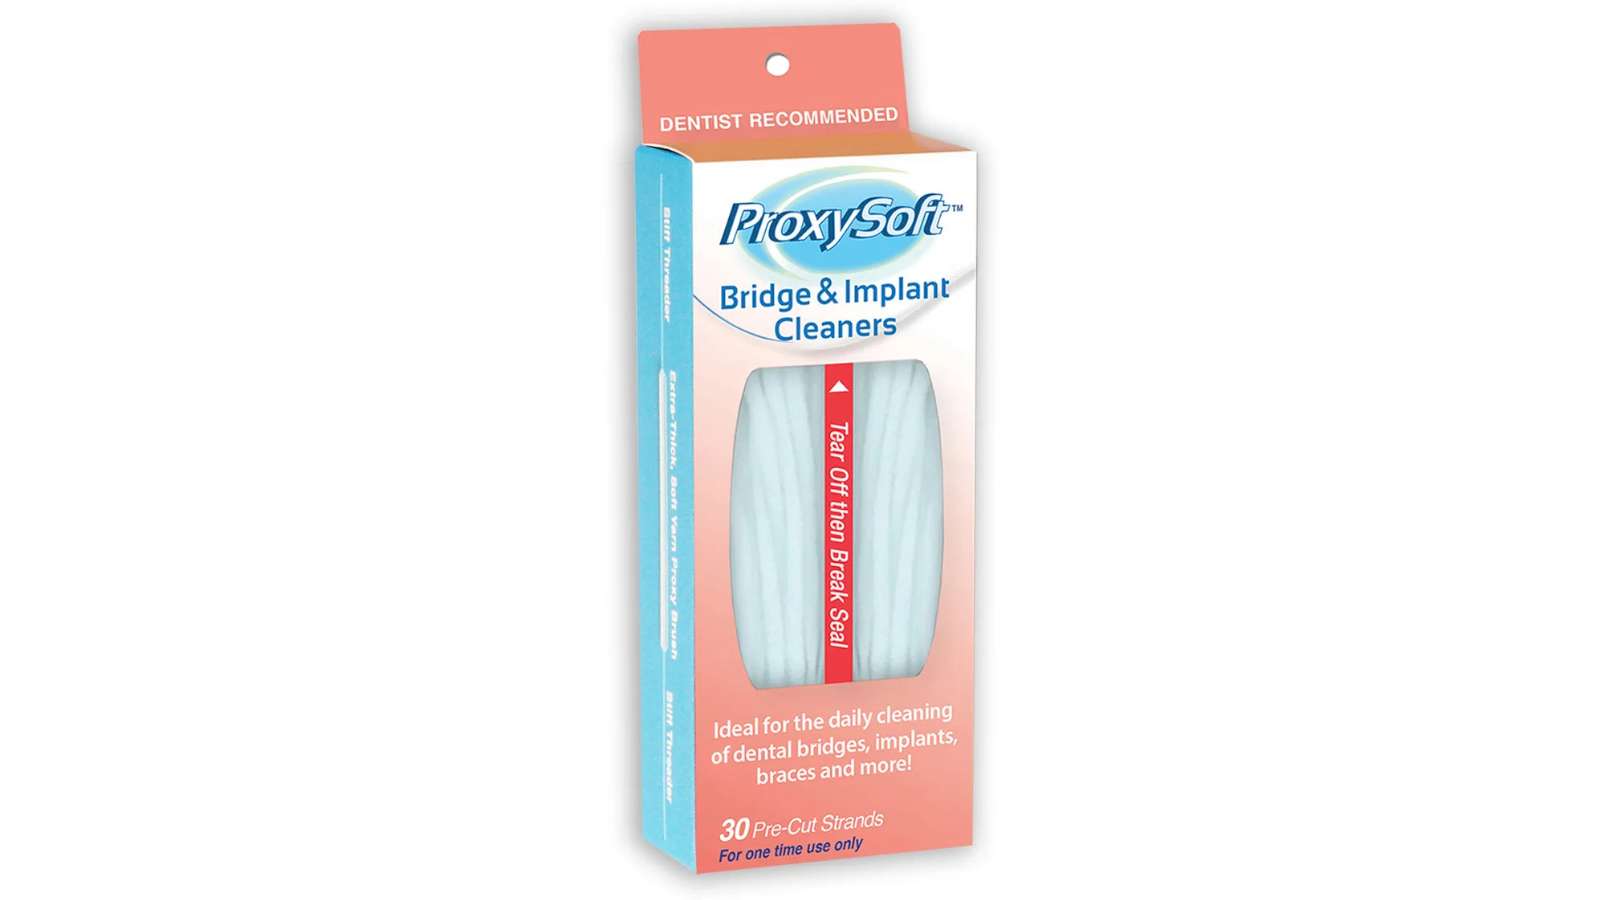 pack of 30 pre cut strands proxysoft bridge and implant cleaners